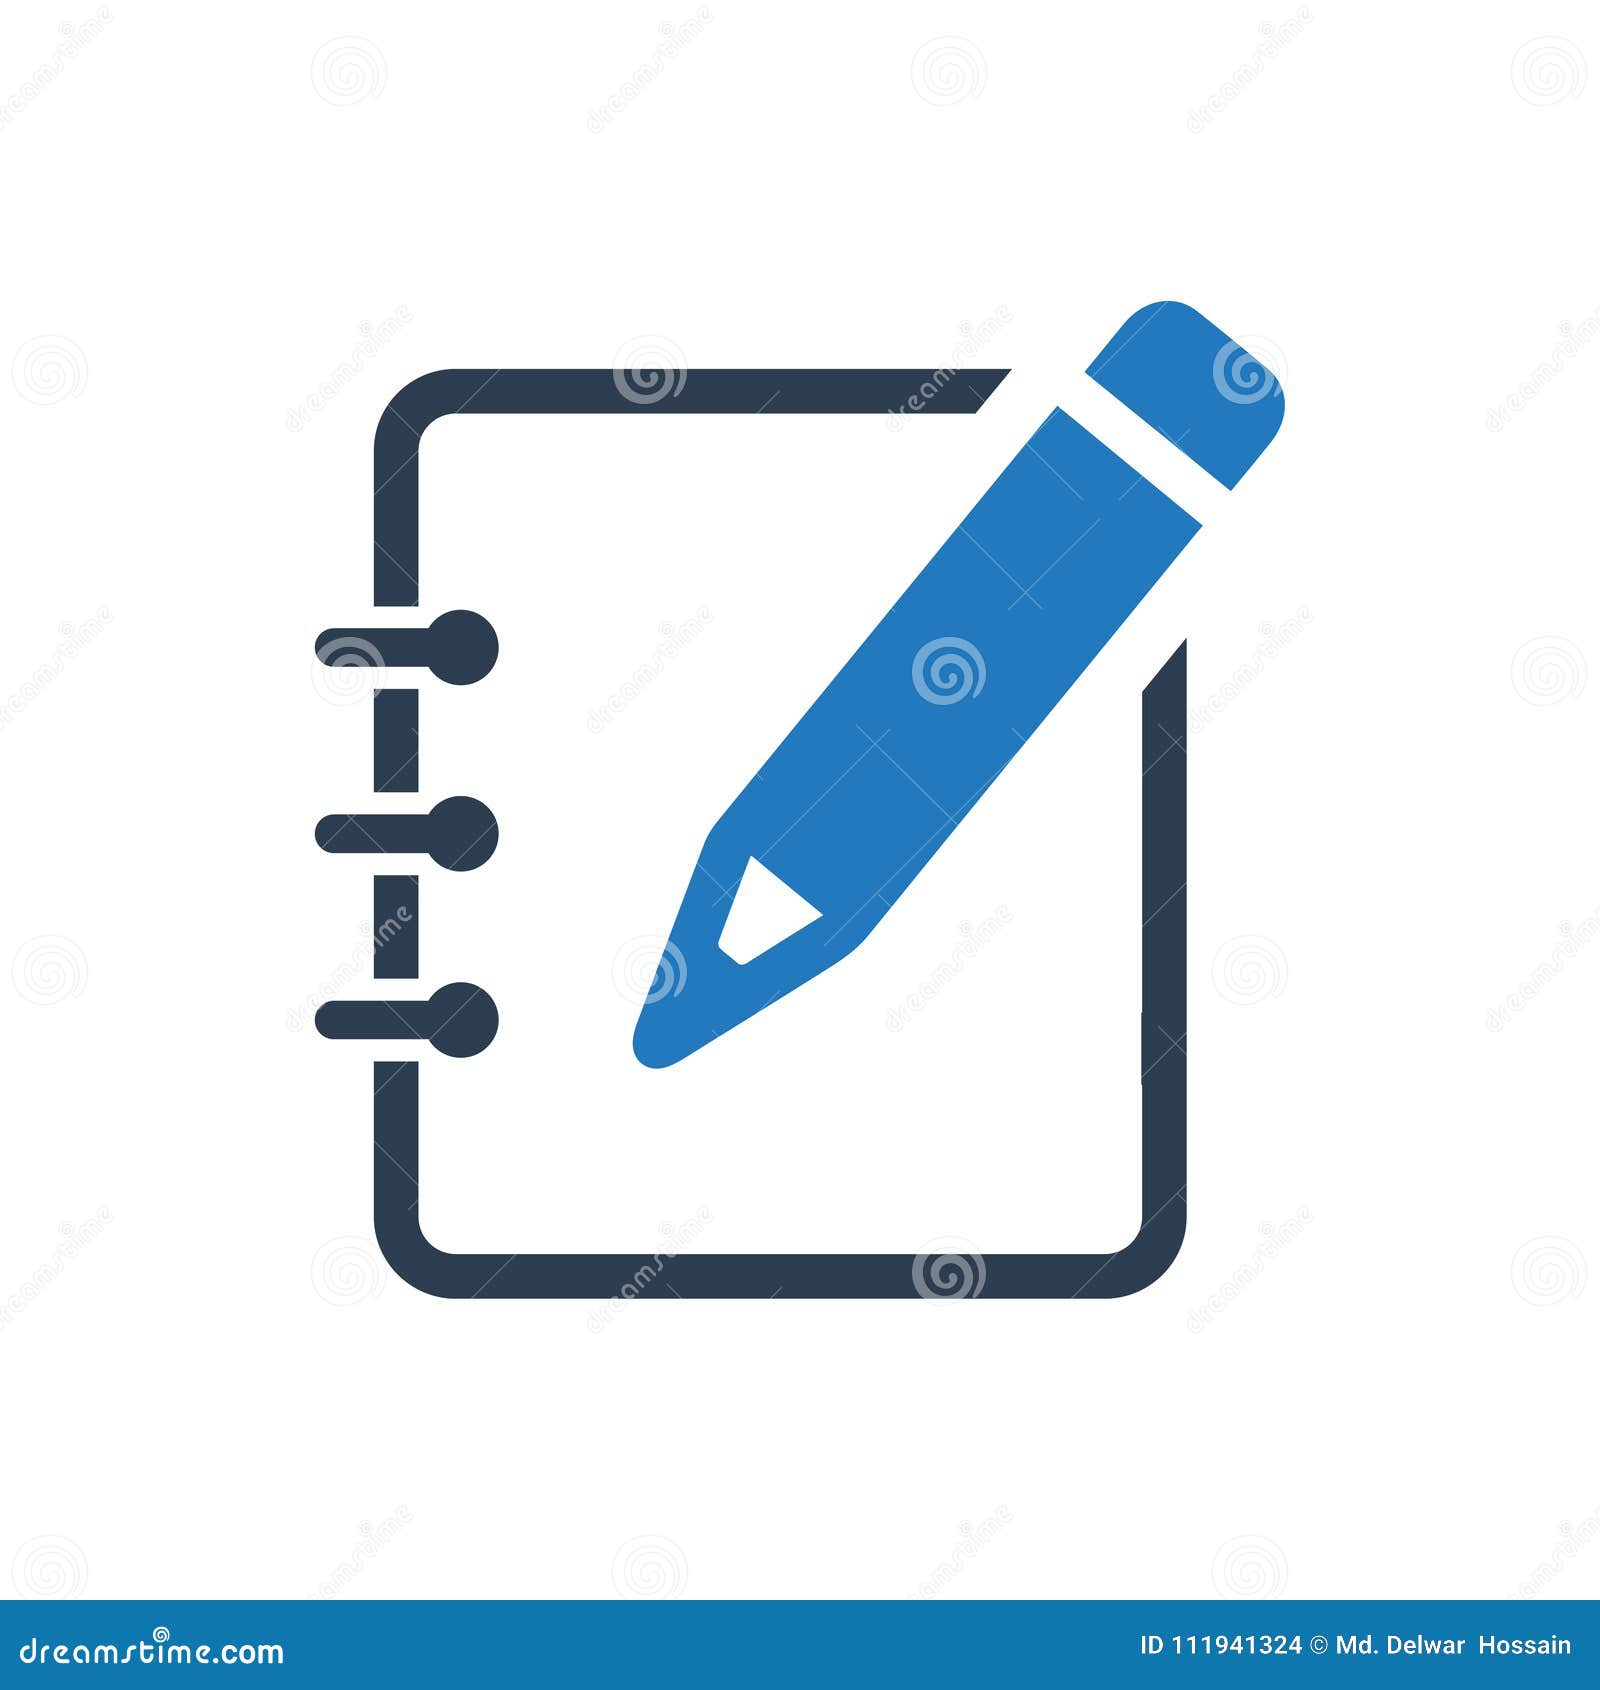 Note taking Illustration - Download for free – Iconduck